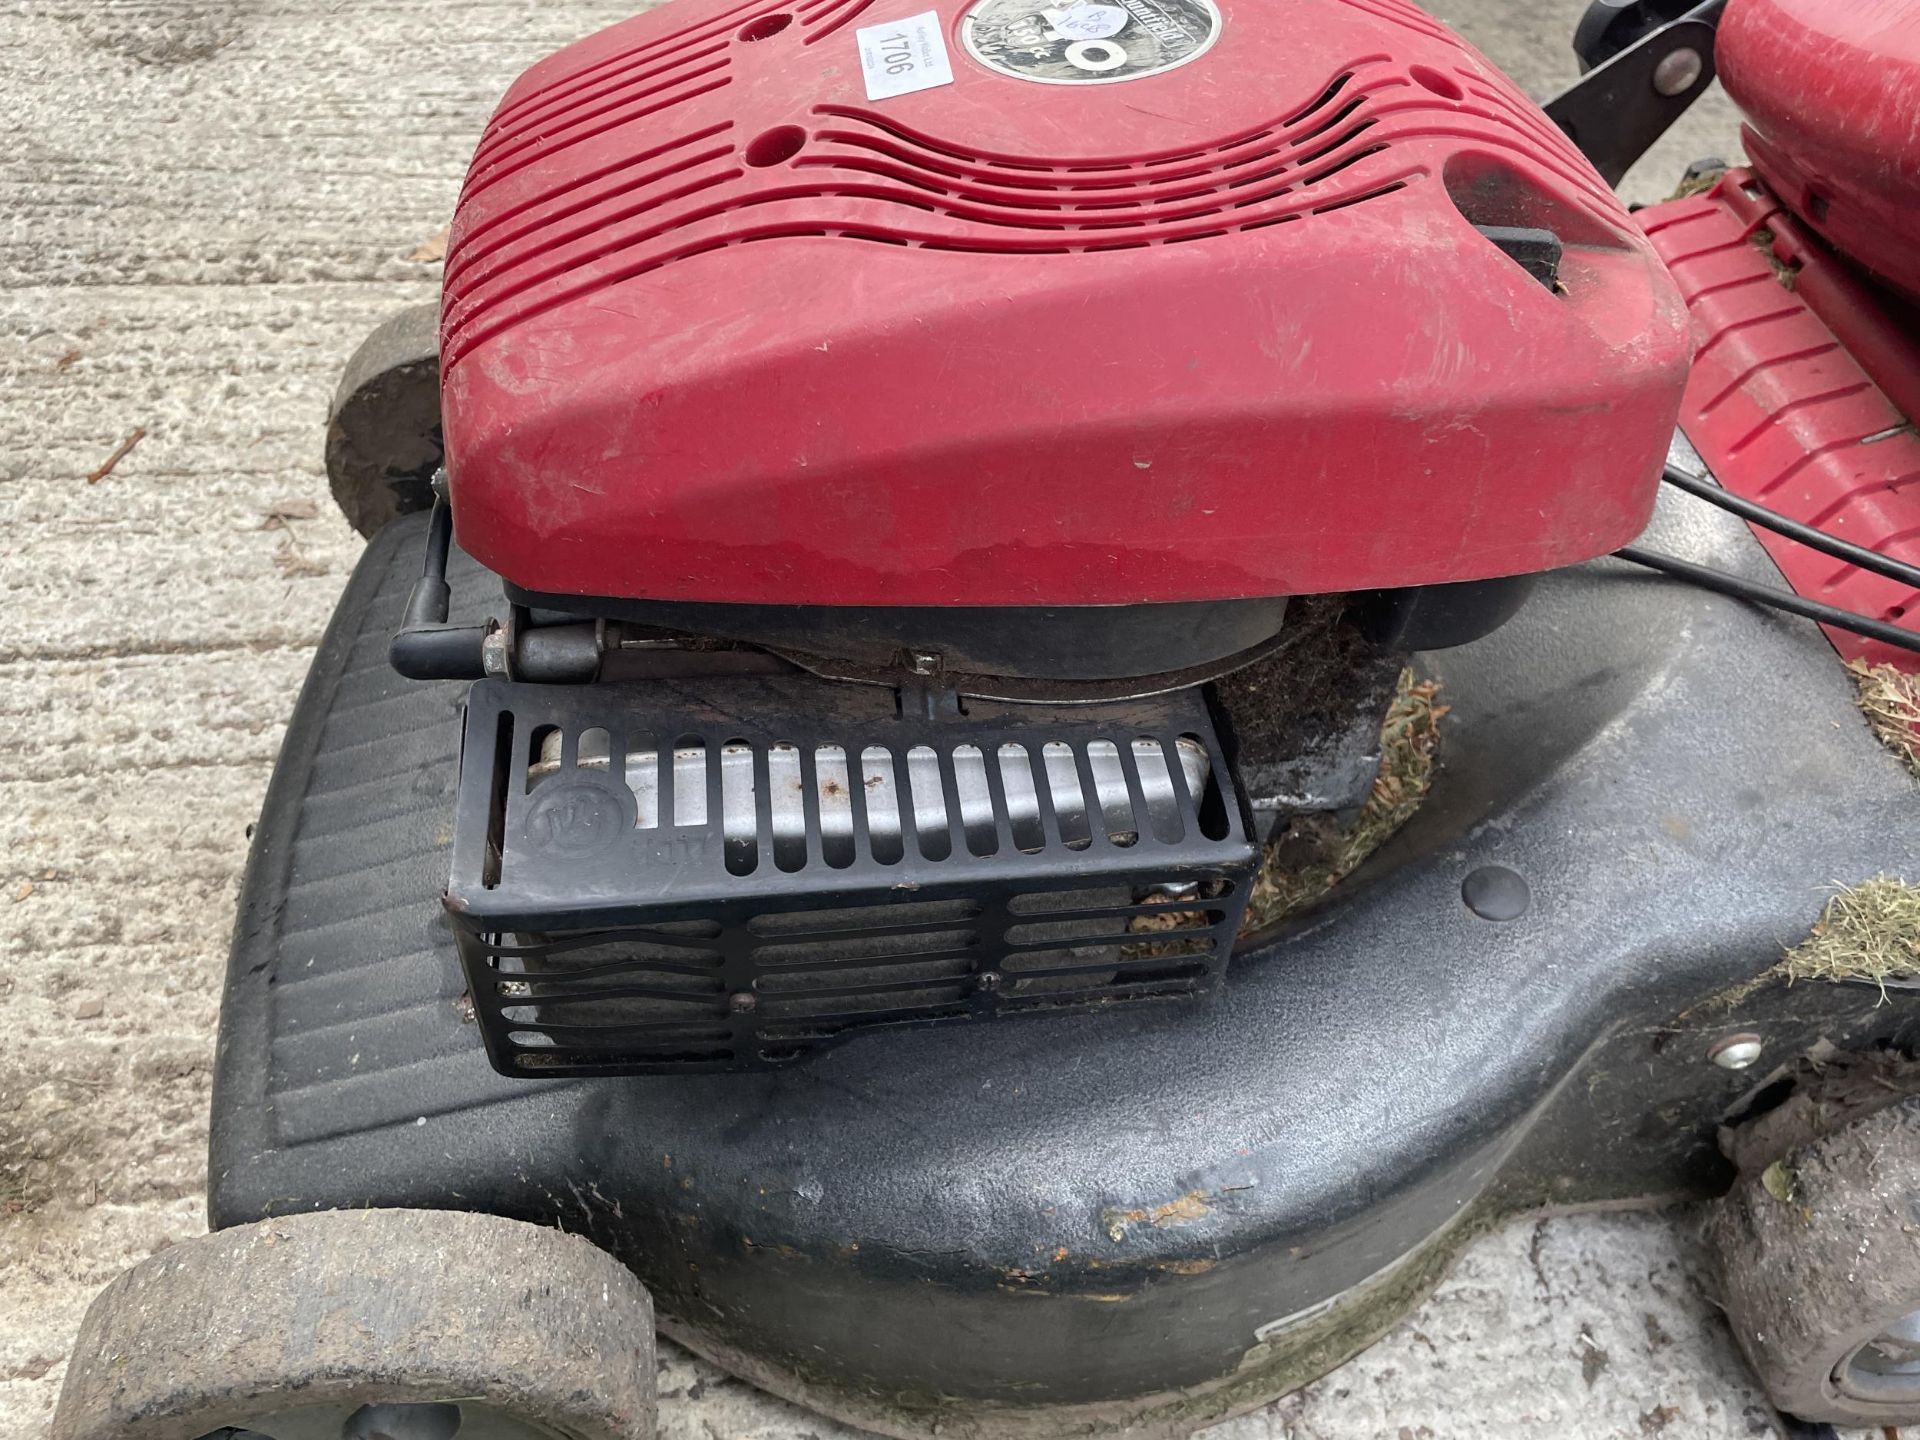 A MOUNTFIELD PETROL LAWN MOWER WITH GRASS BOX - Image 3 of 3